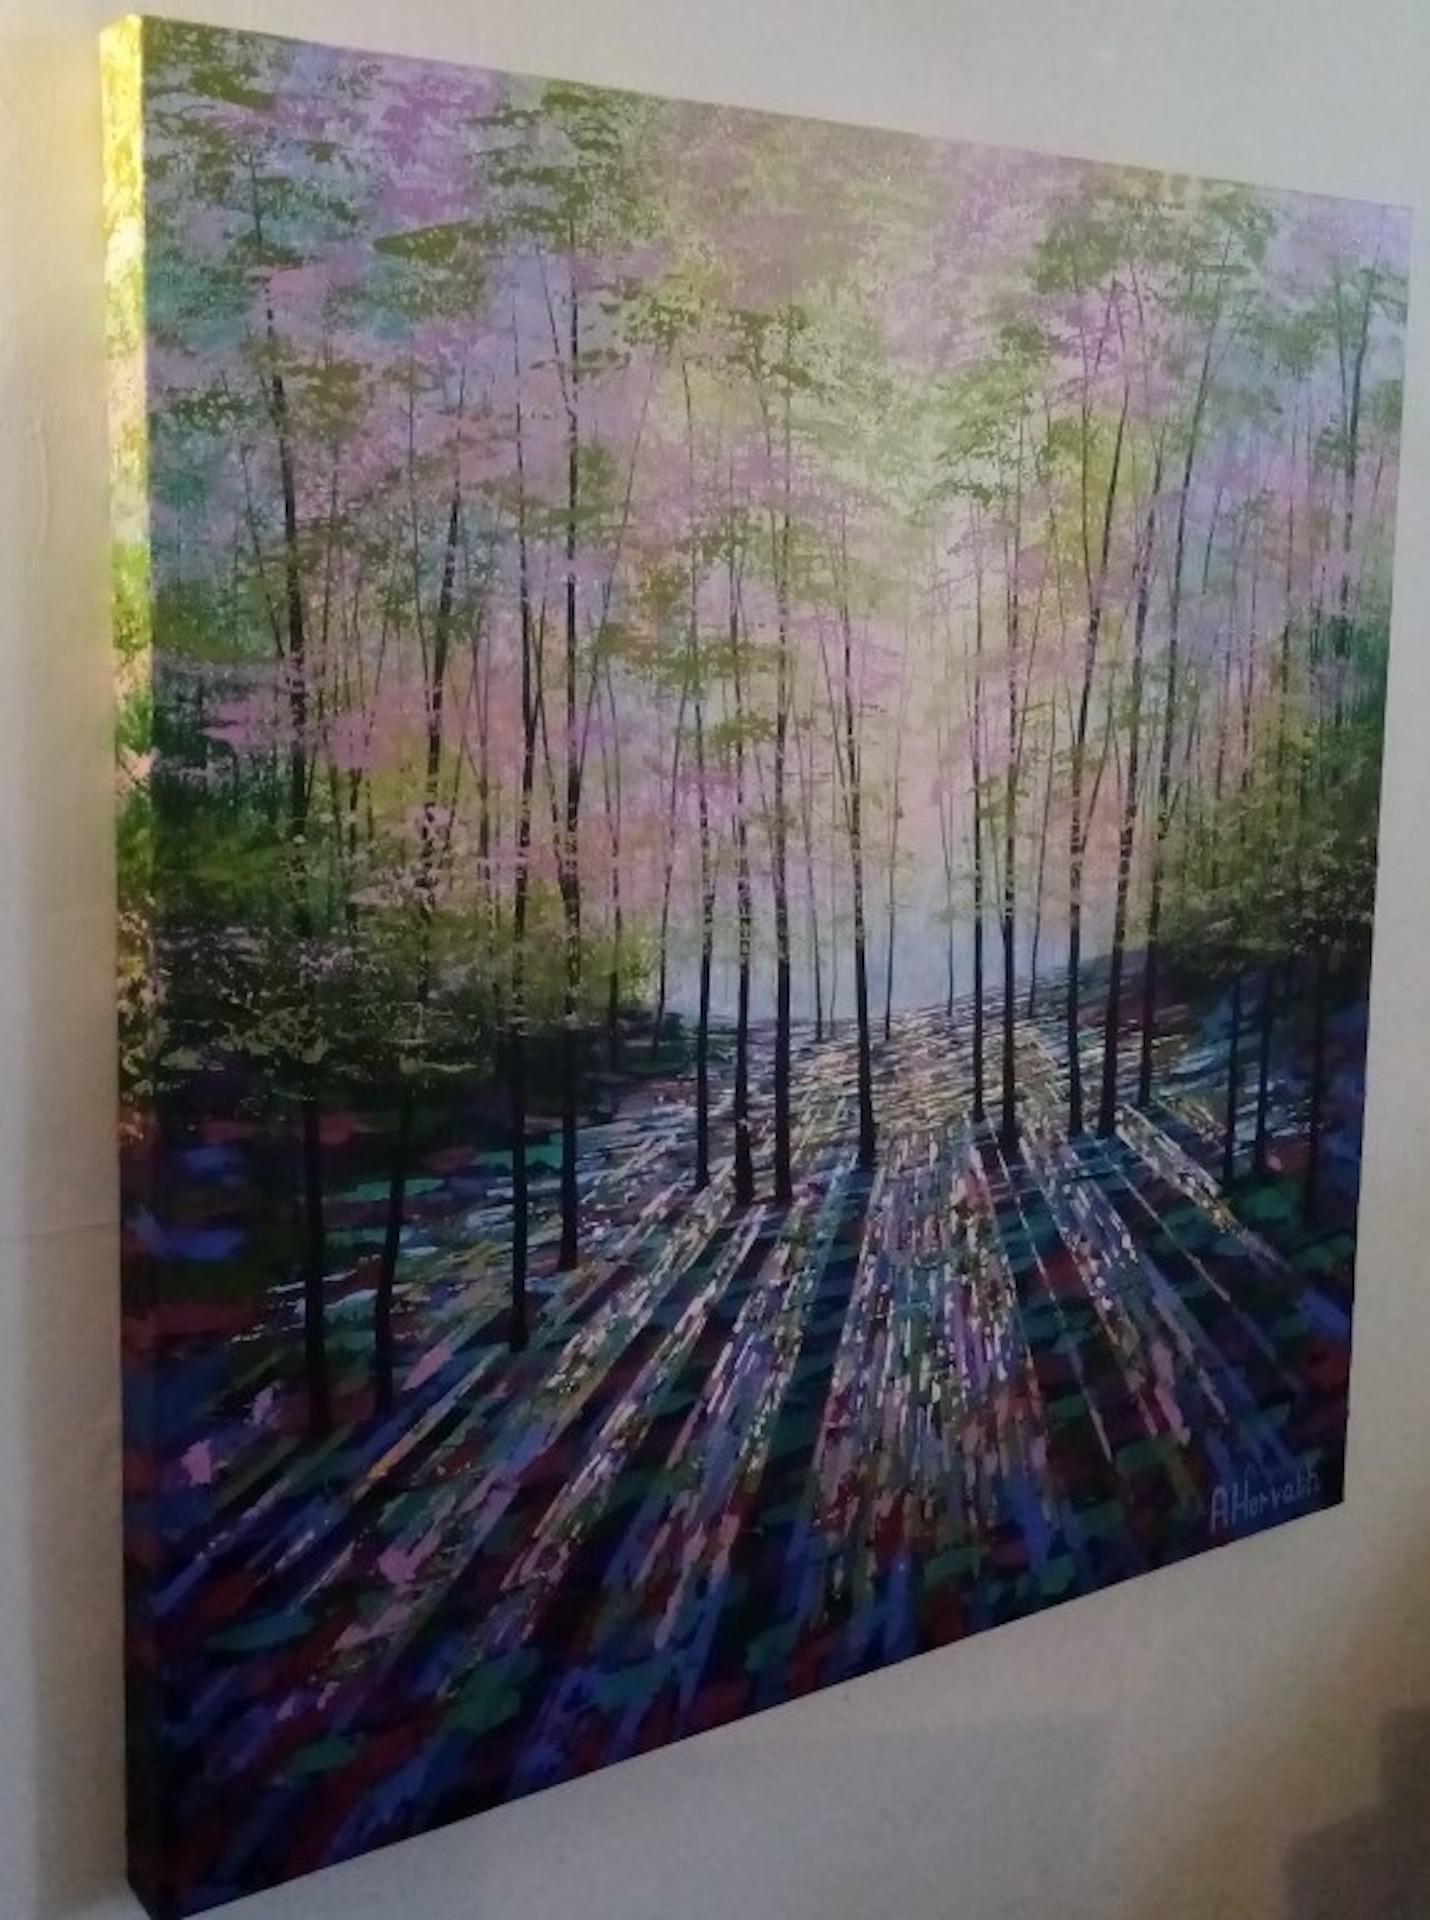 Amanda Horvath
A Moment in Time
Original Acrylic Painting on Canvas
Acrylics on canvas
Image size: 76cmx76cmx3.5cms
Sold Unframed

A Moment in Time is an original painting by Amanda Horvath. It is inspired by some beautiful woods close to my home in